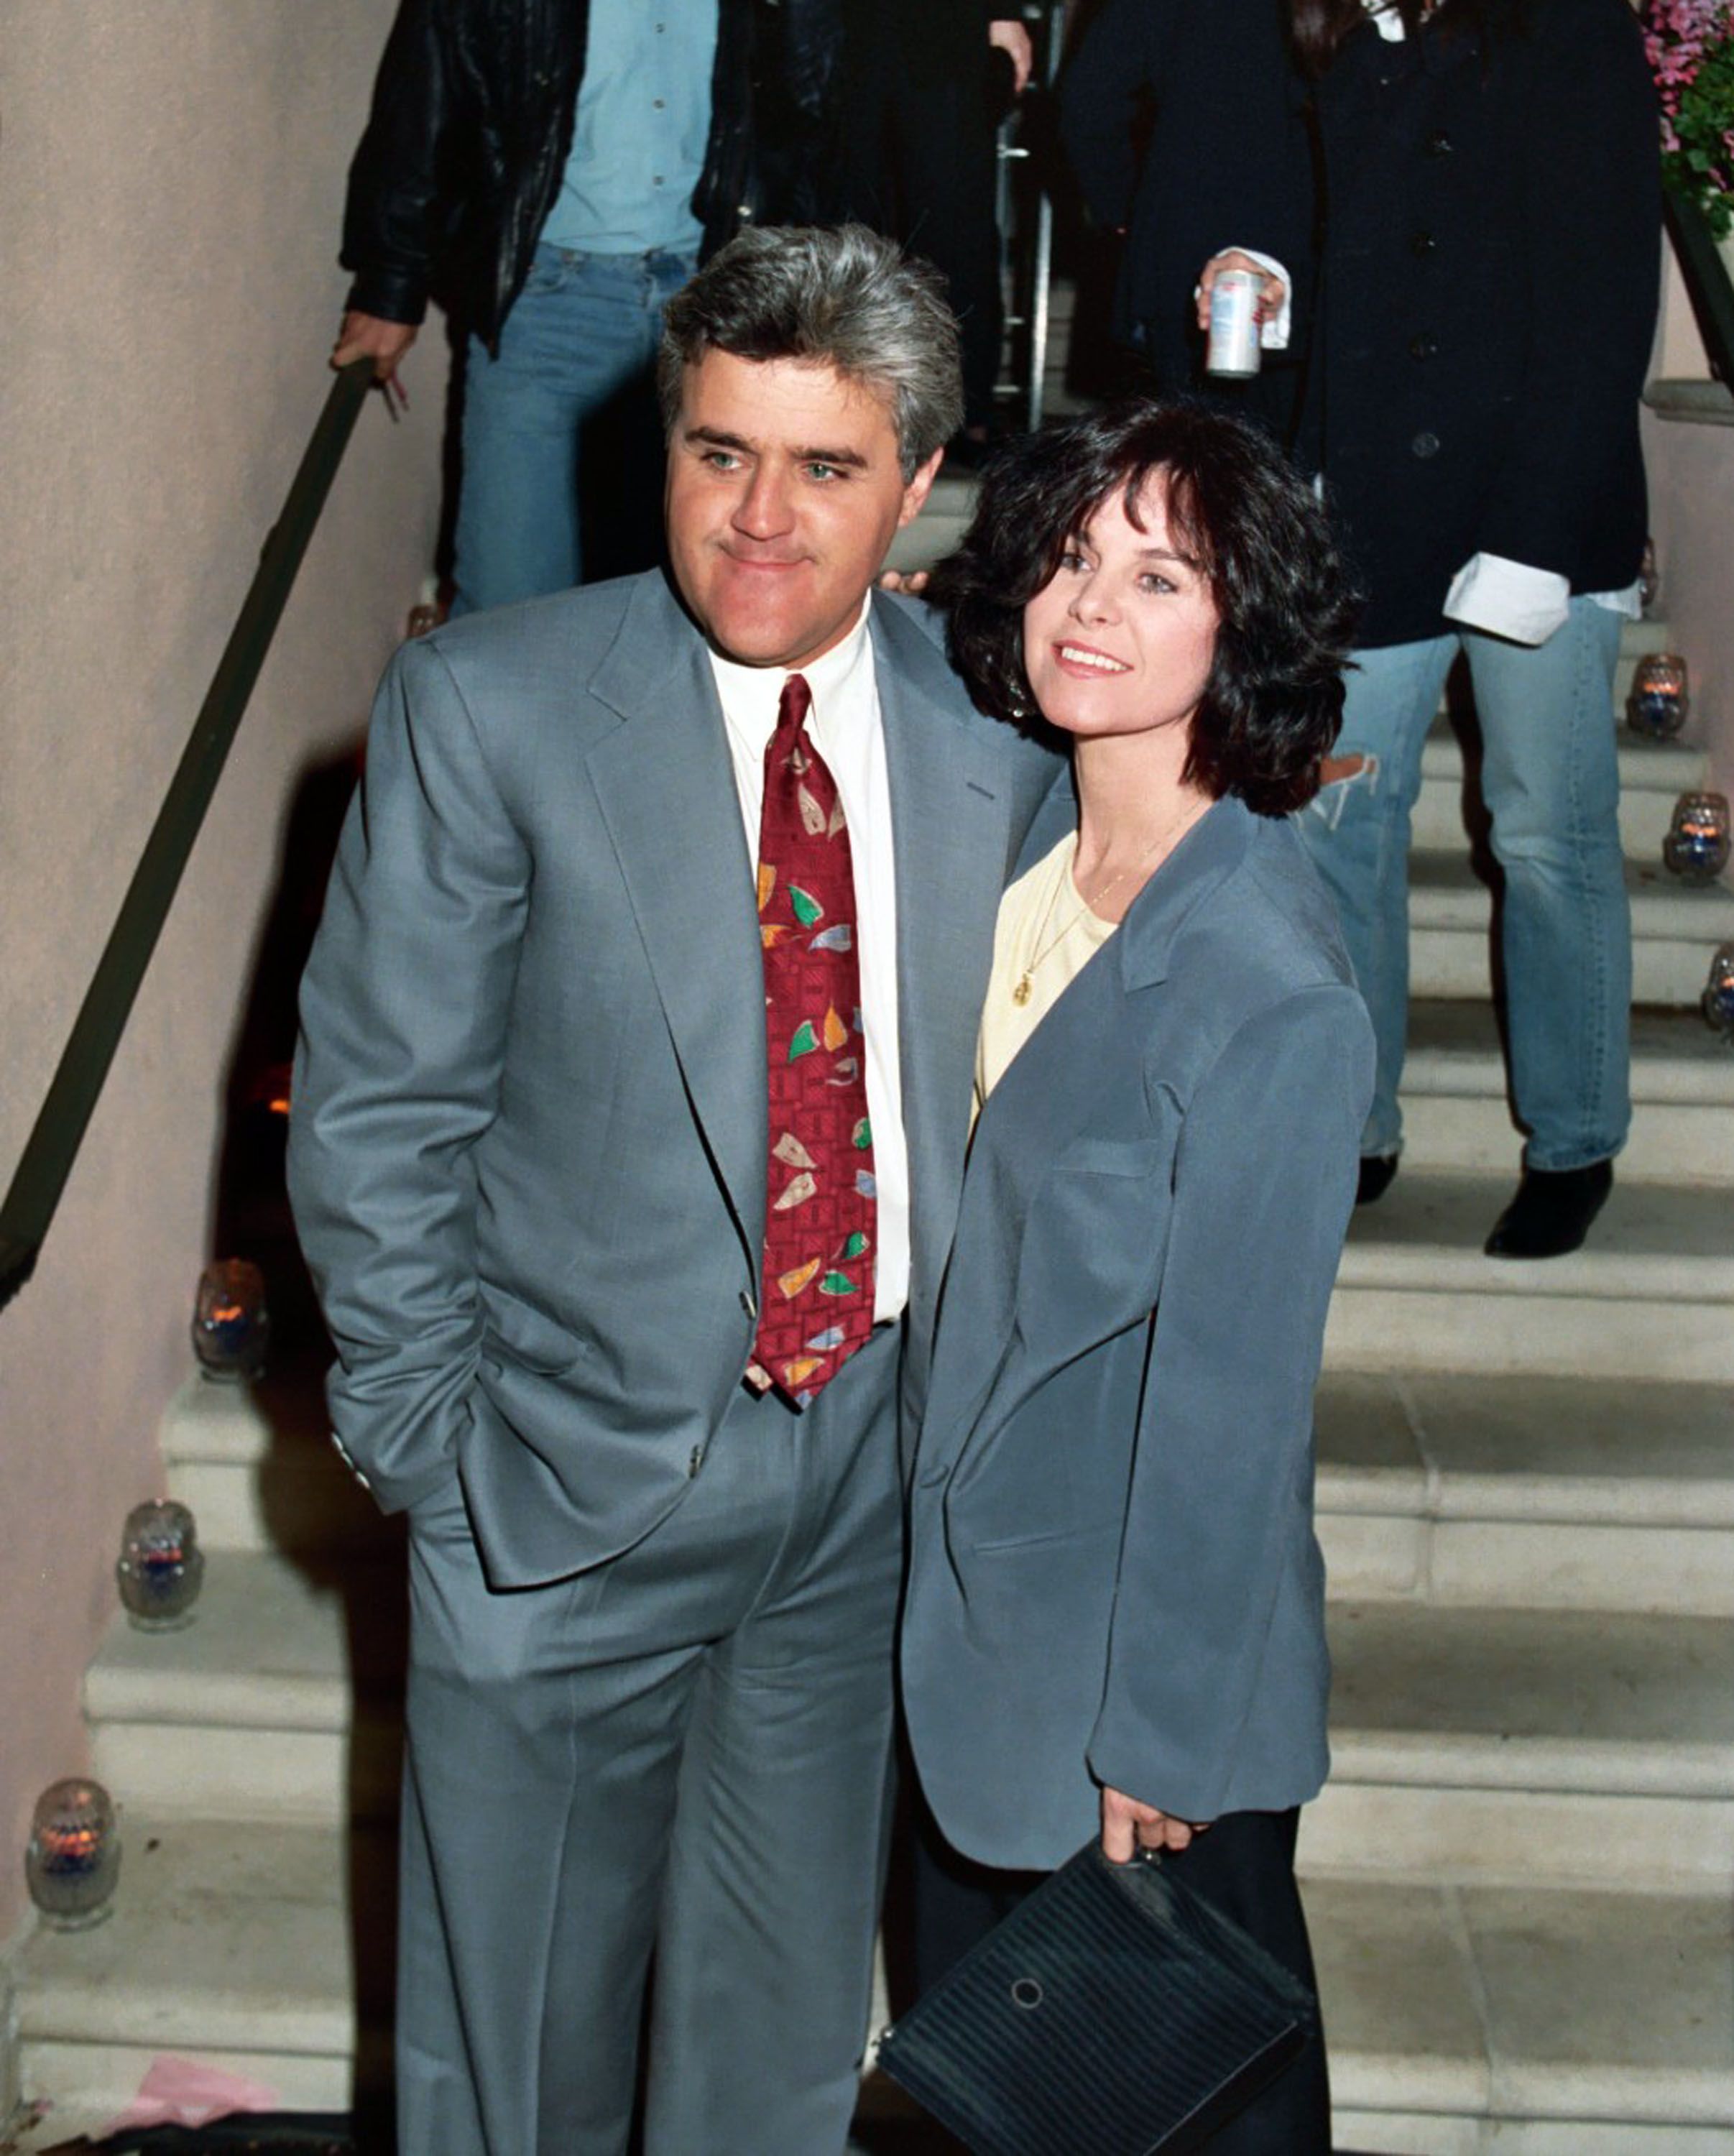 Jay and Mavis Leno during Poolside Cocktail Party for Kelly Klein's Book, "Pools" in Beverly Hills, California, on November 19, 1992. | Source: Getty Images